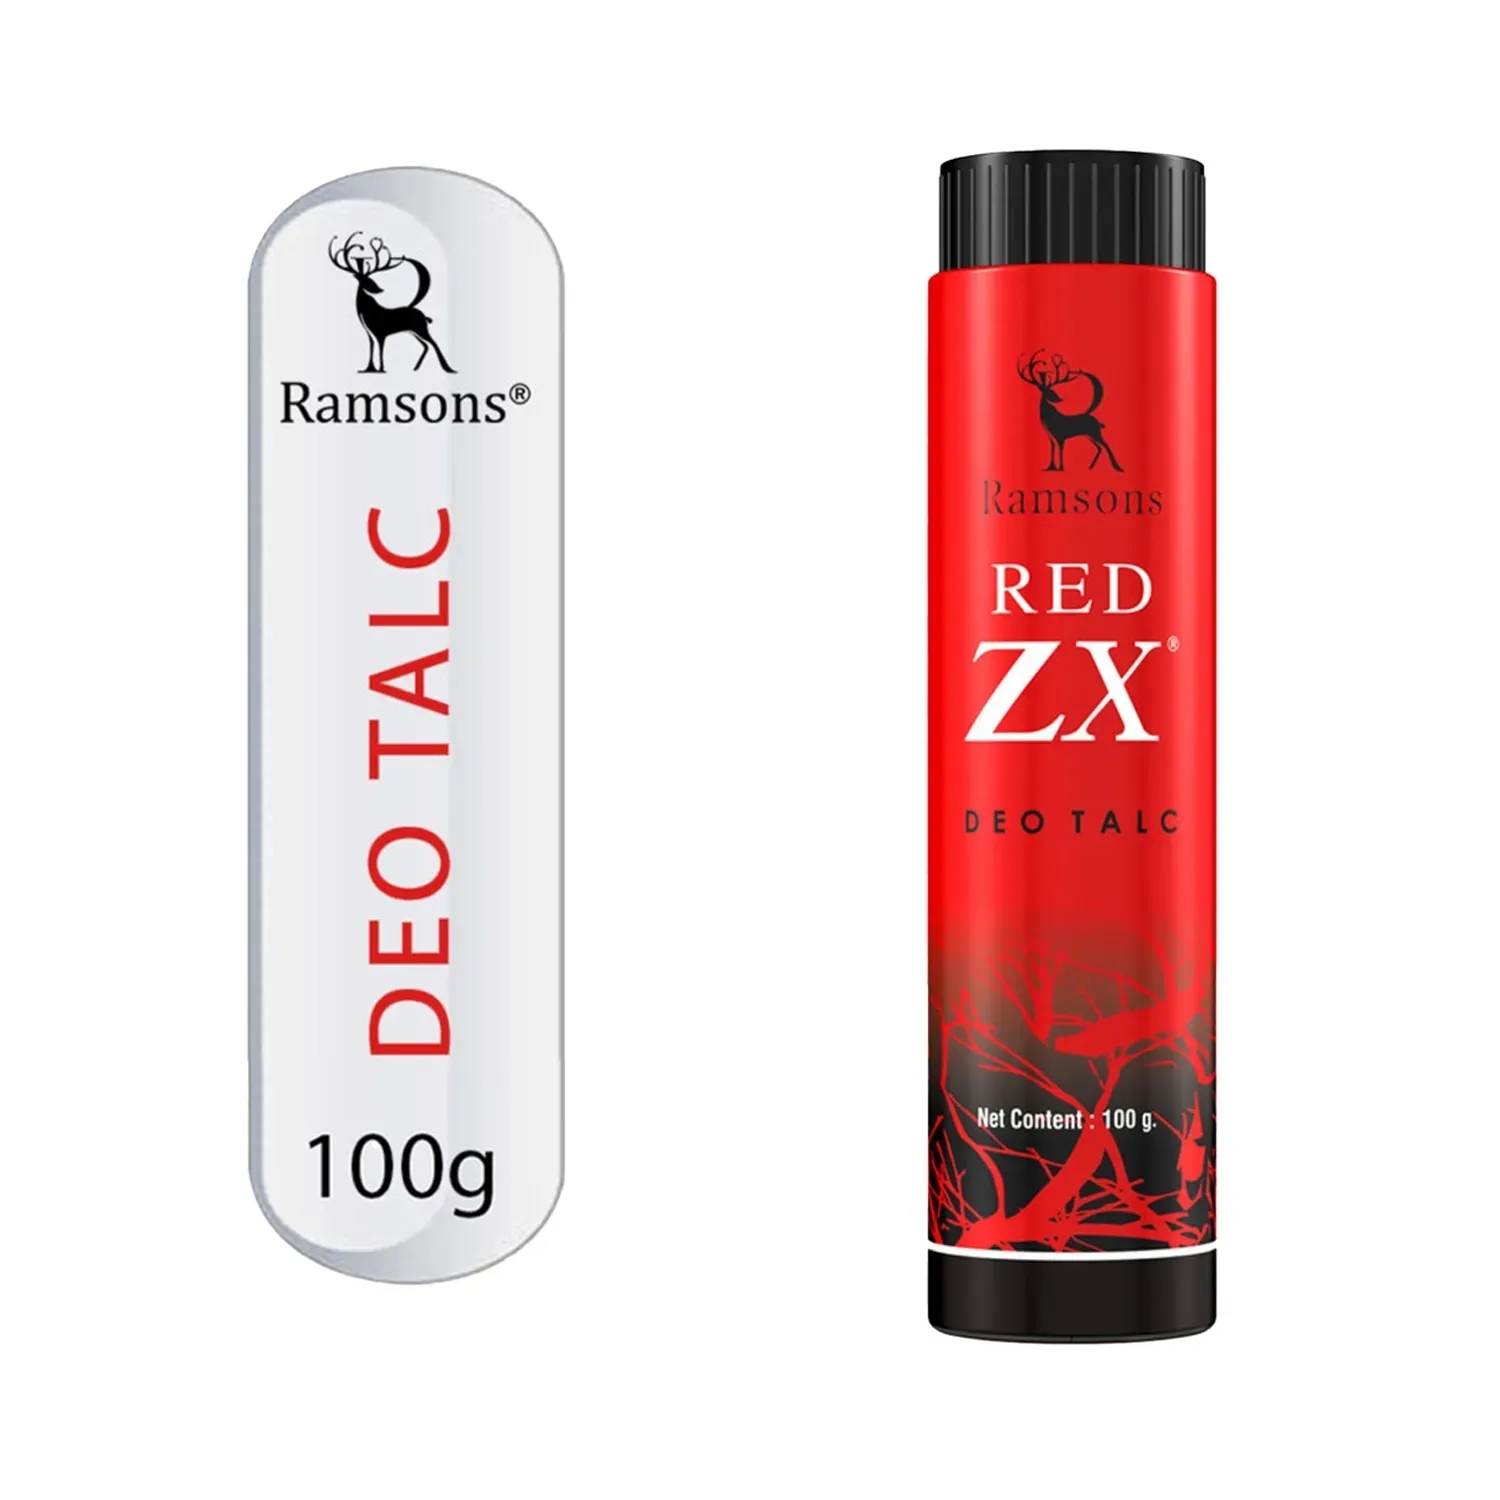 Ramsons | Ramsons Red Zx Deo Talc (100g)